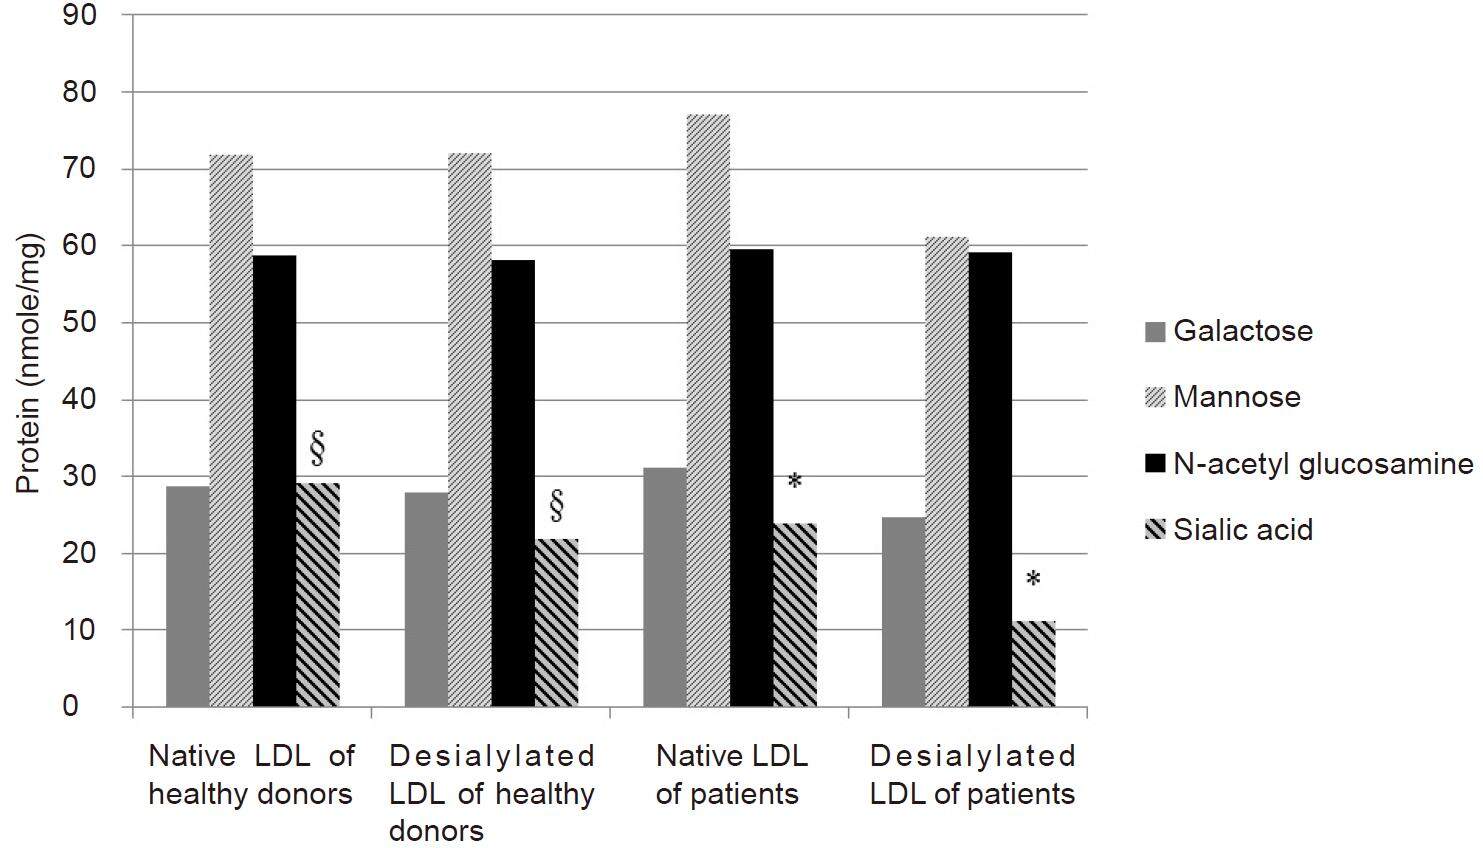 Chemical composition of circulating native and desialylated low density lipoprotein: what is the difference?